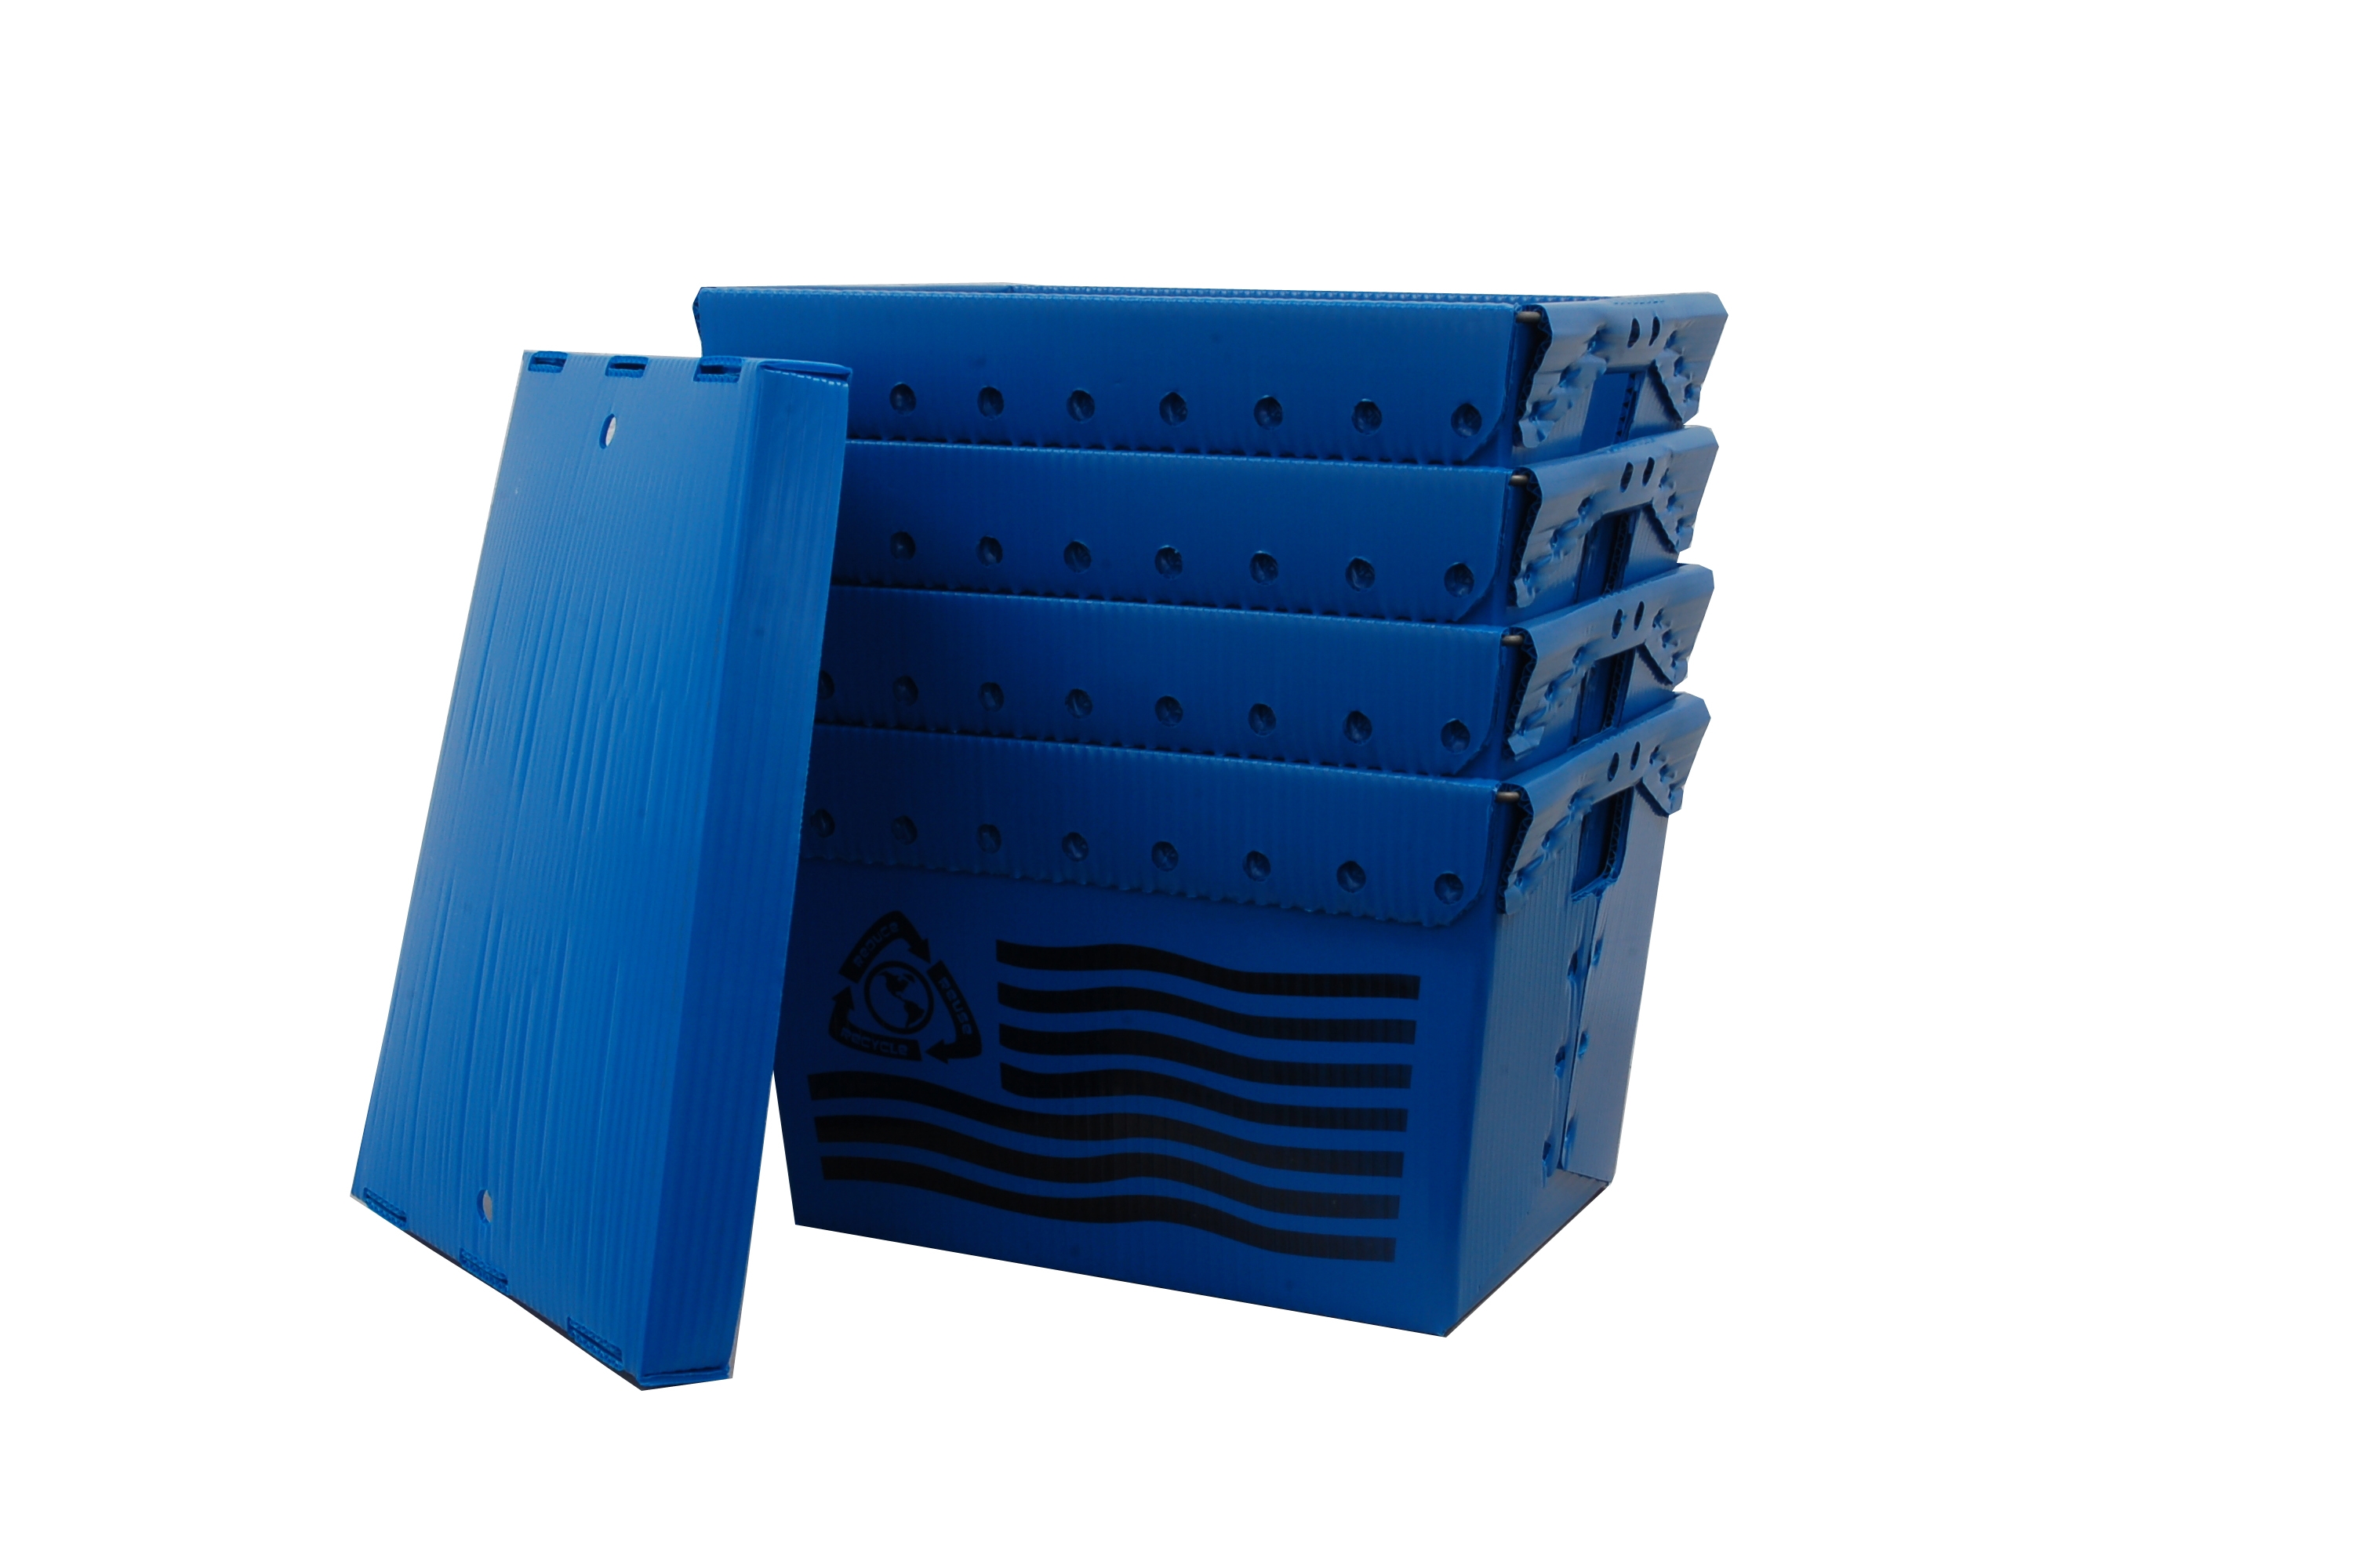 Corrugated Plastic Postal Totes For Sale Viable Packaging